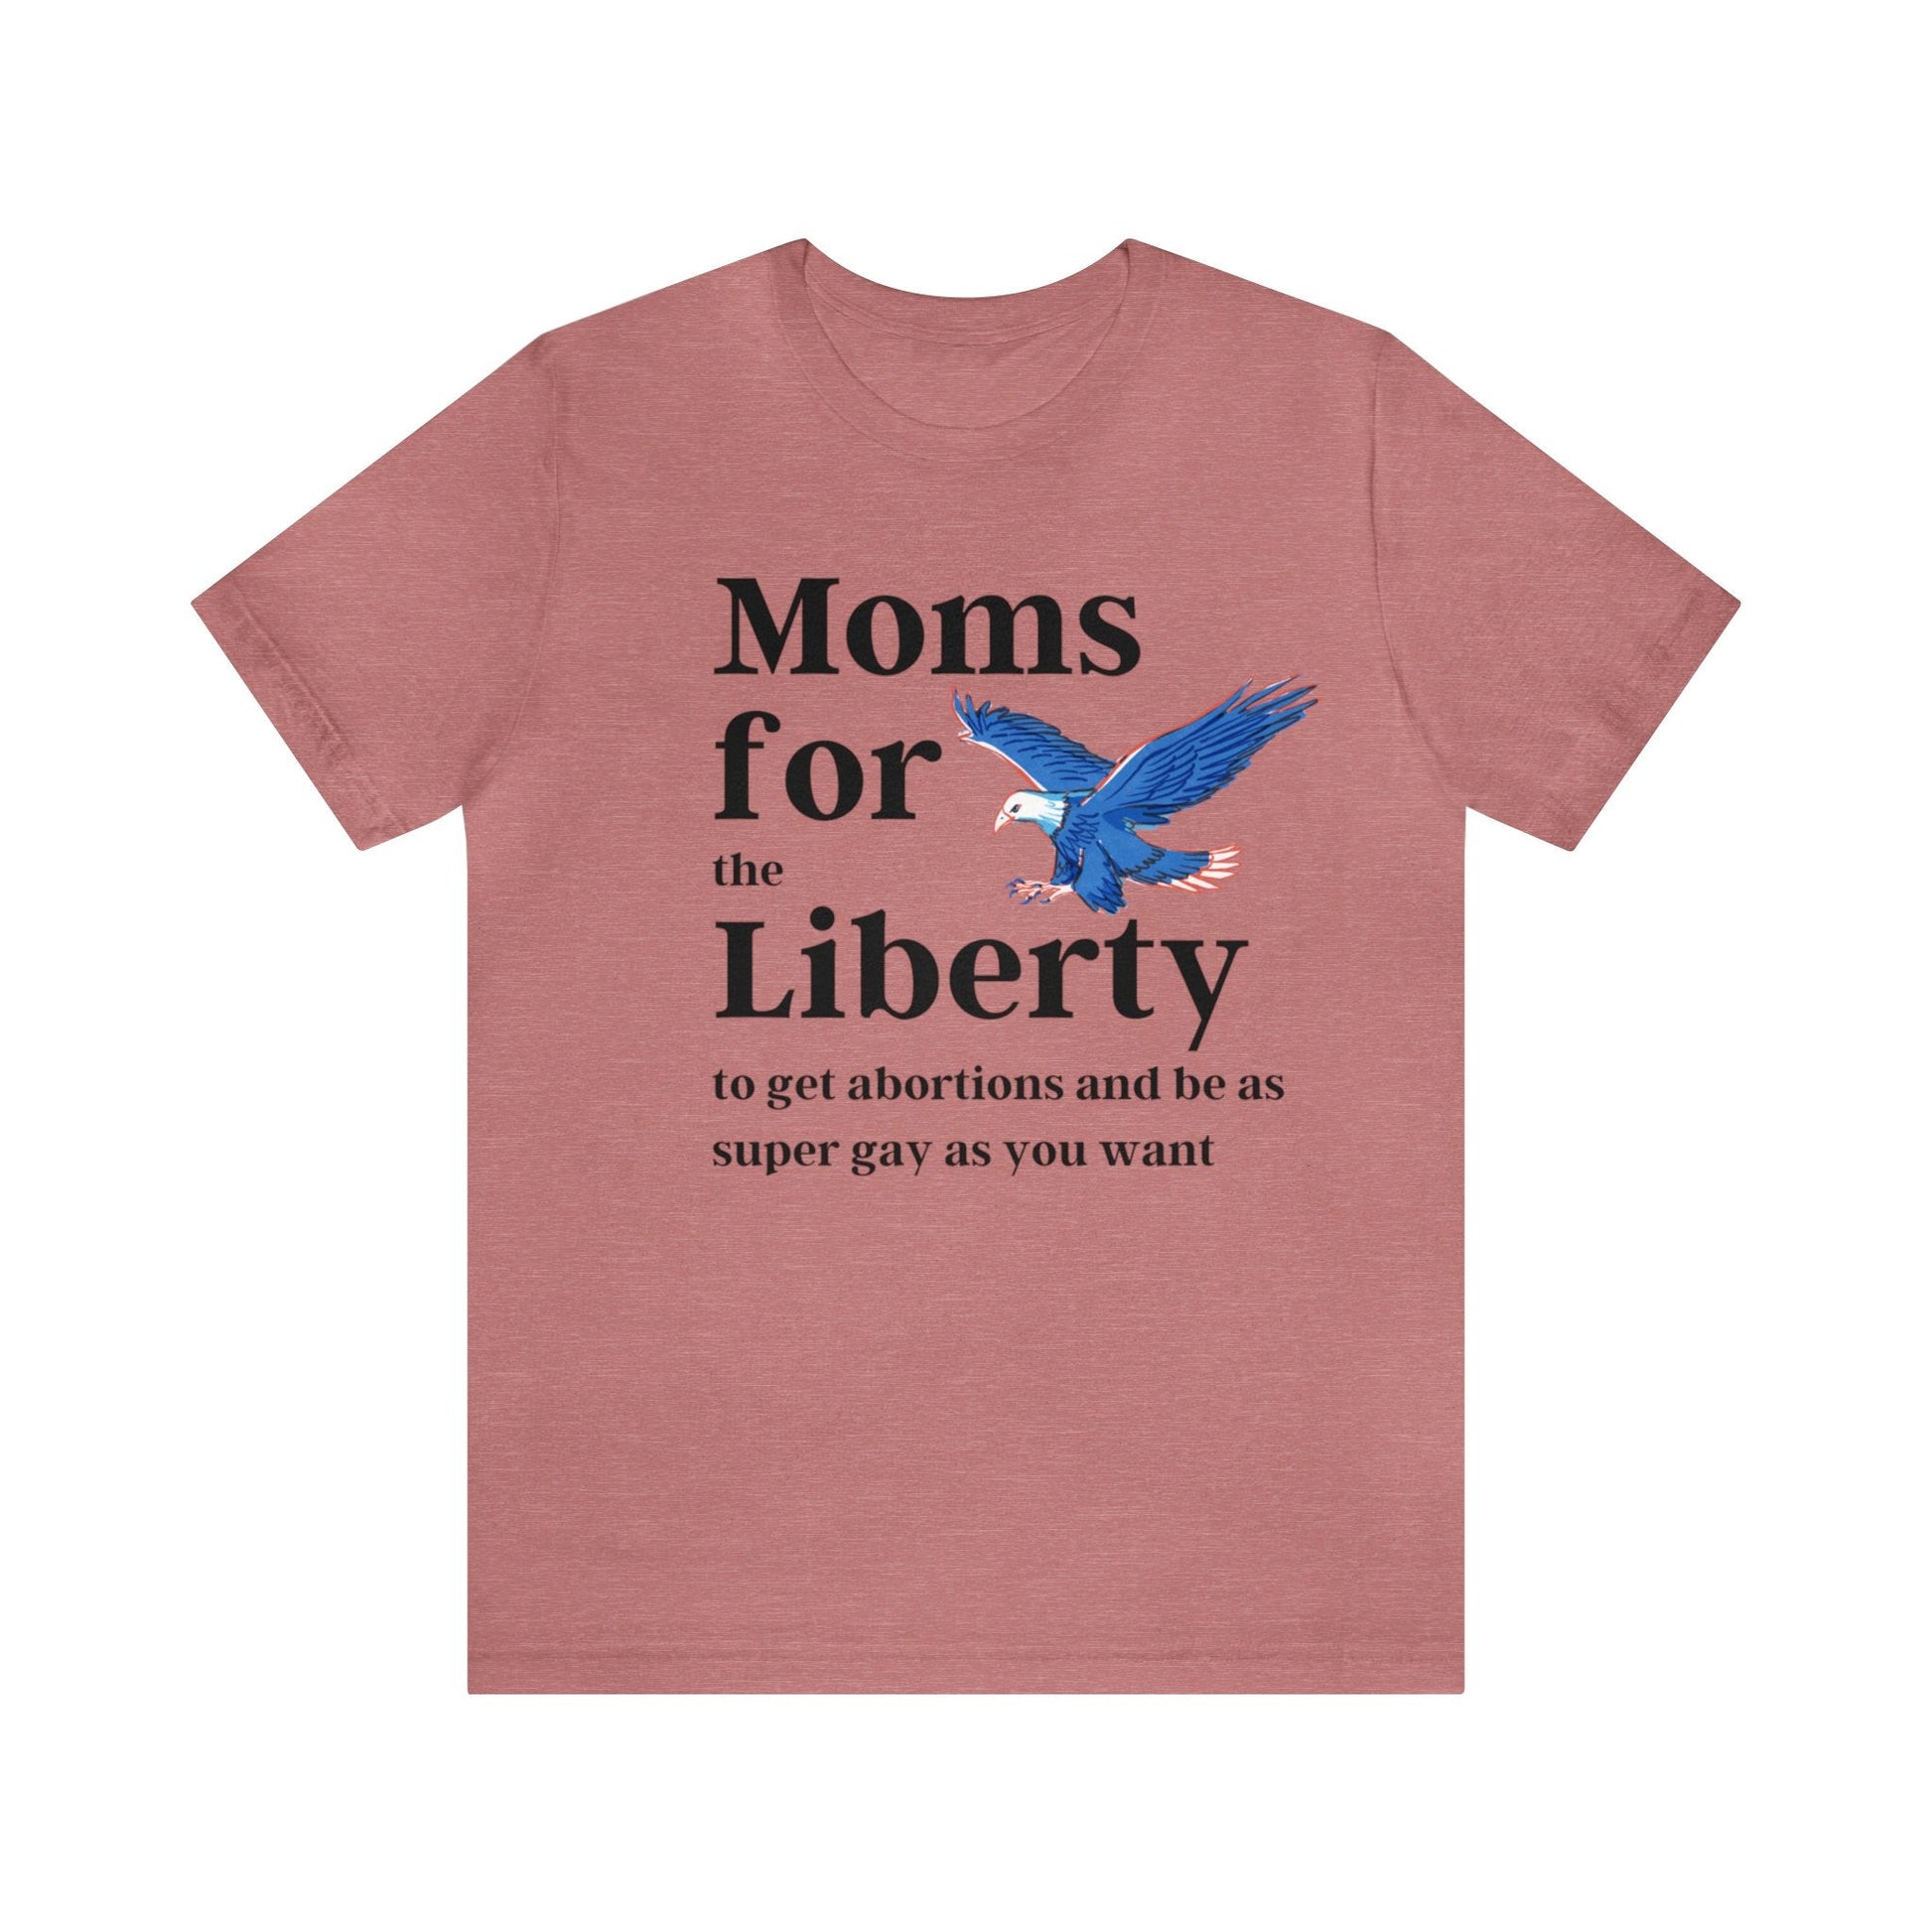 [SATIRE] Moms for (the) Liberty (to get abortions and be as super gay as you want) Unisex Short Sleeve Tee [Multiple Color Options]